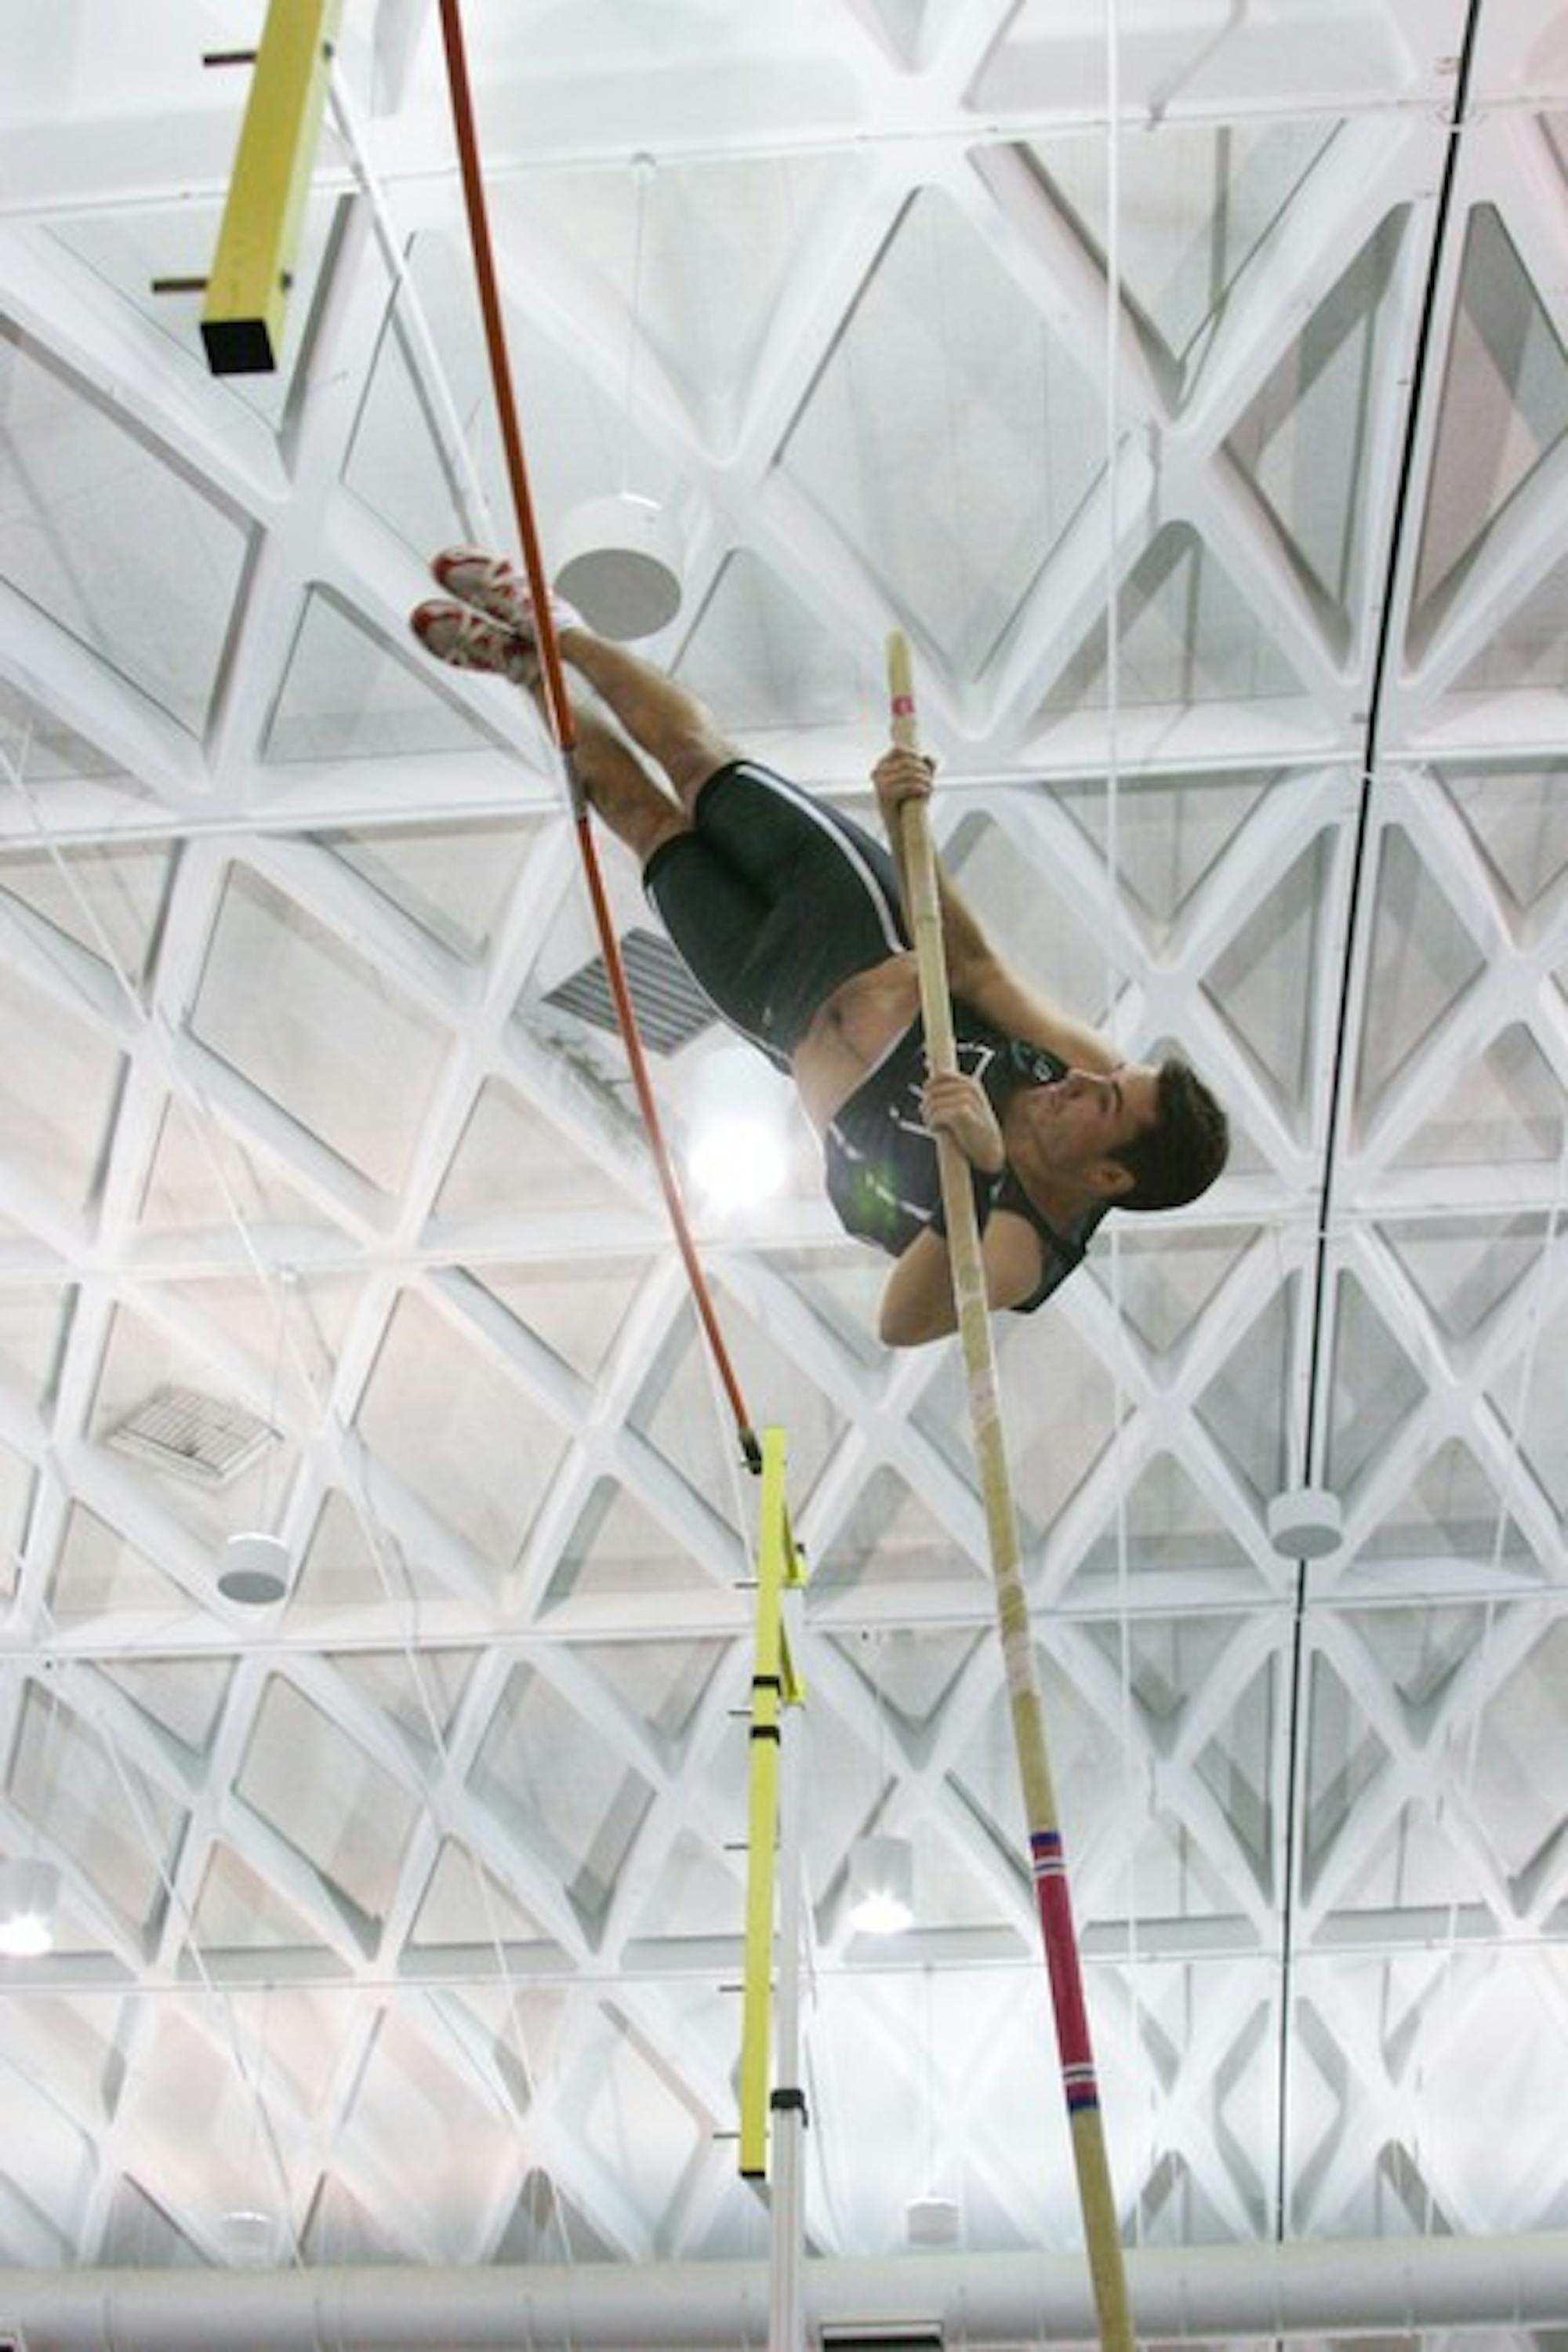 Ken DiCairano '10 placed first in men's pole vault at the Dartmouth Relays this weekend in Hanover.